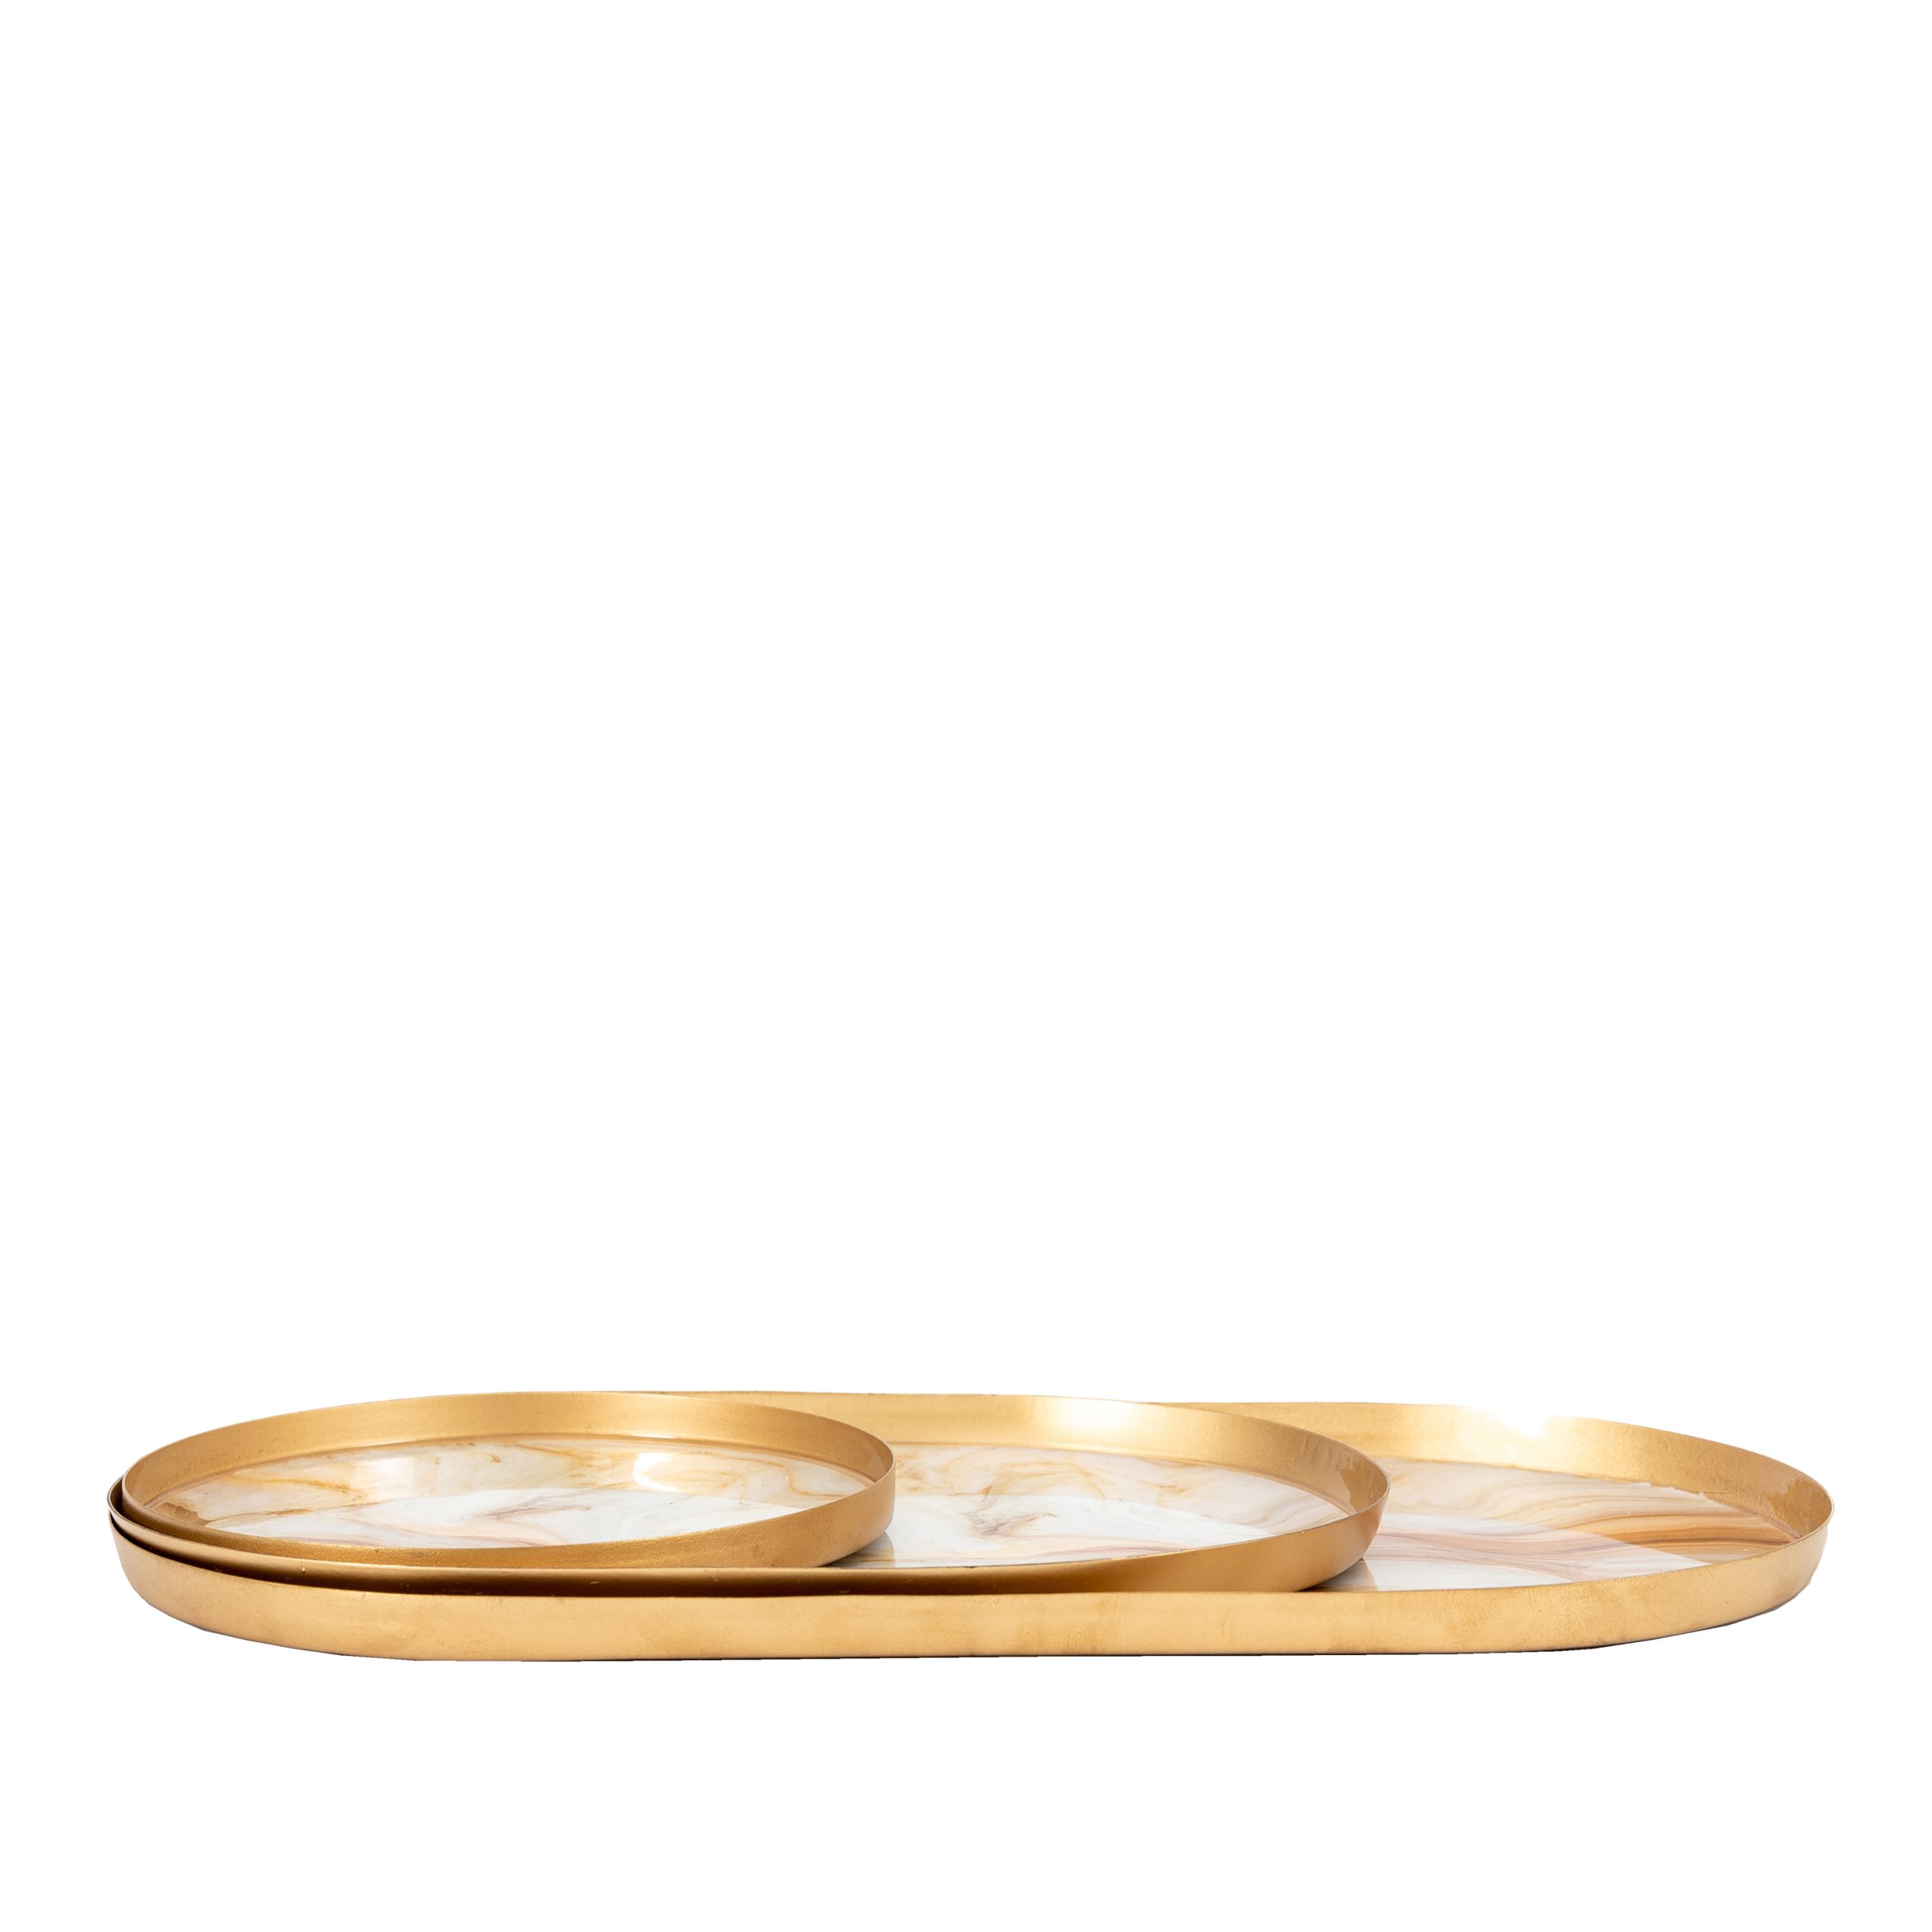 Gallery Direct Sahara Round Marbled Tray (Set of 3